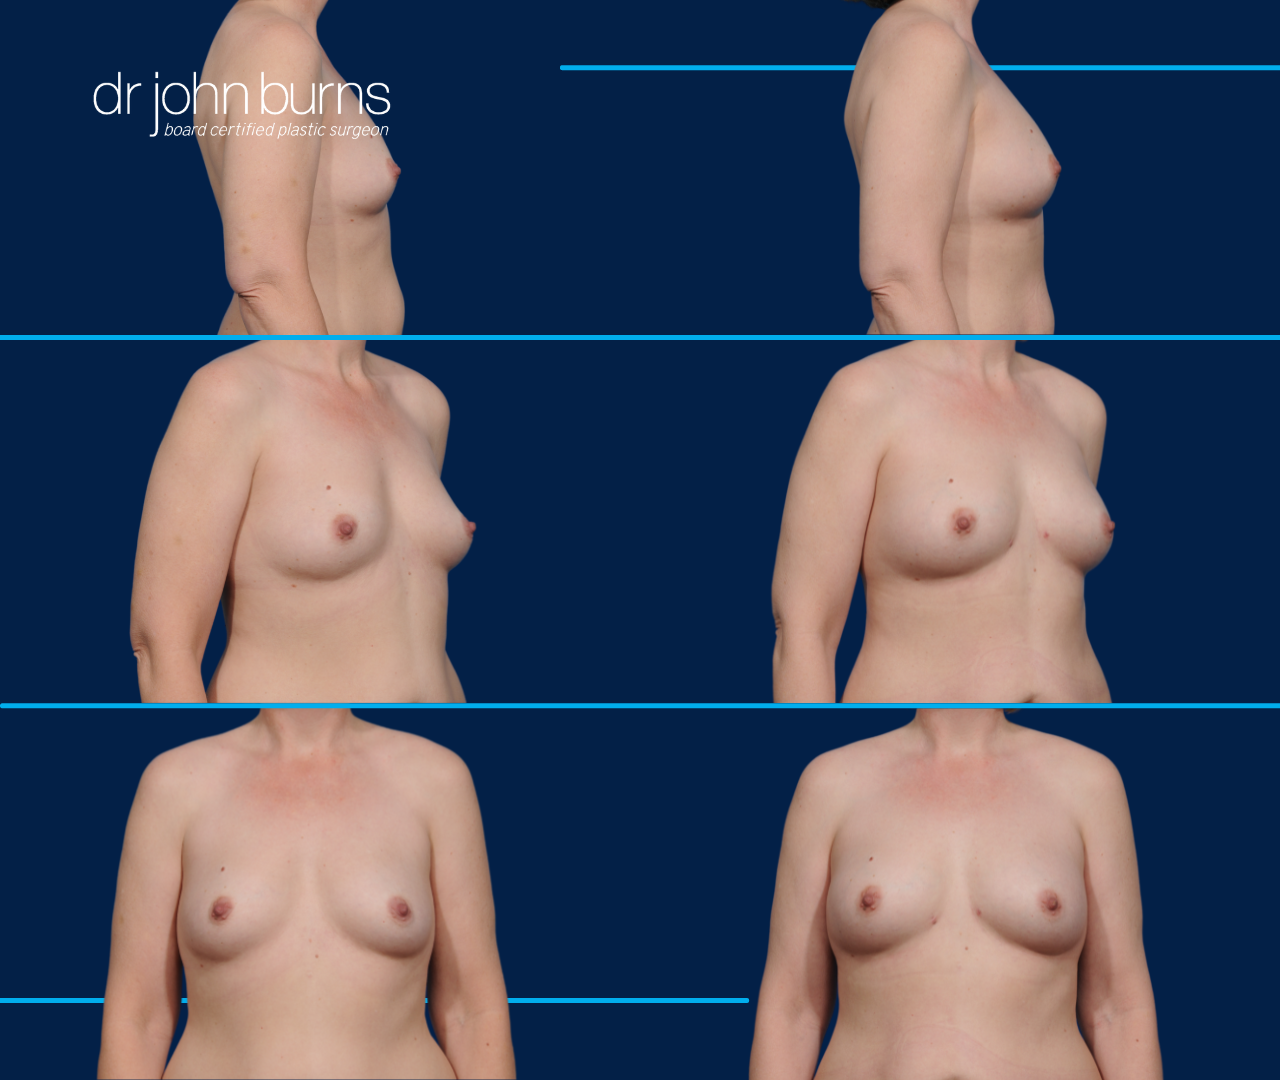 case 5- before and after breast augmentation fat transfer by top plastic surgeon, Dr. John Burns